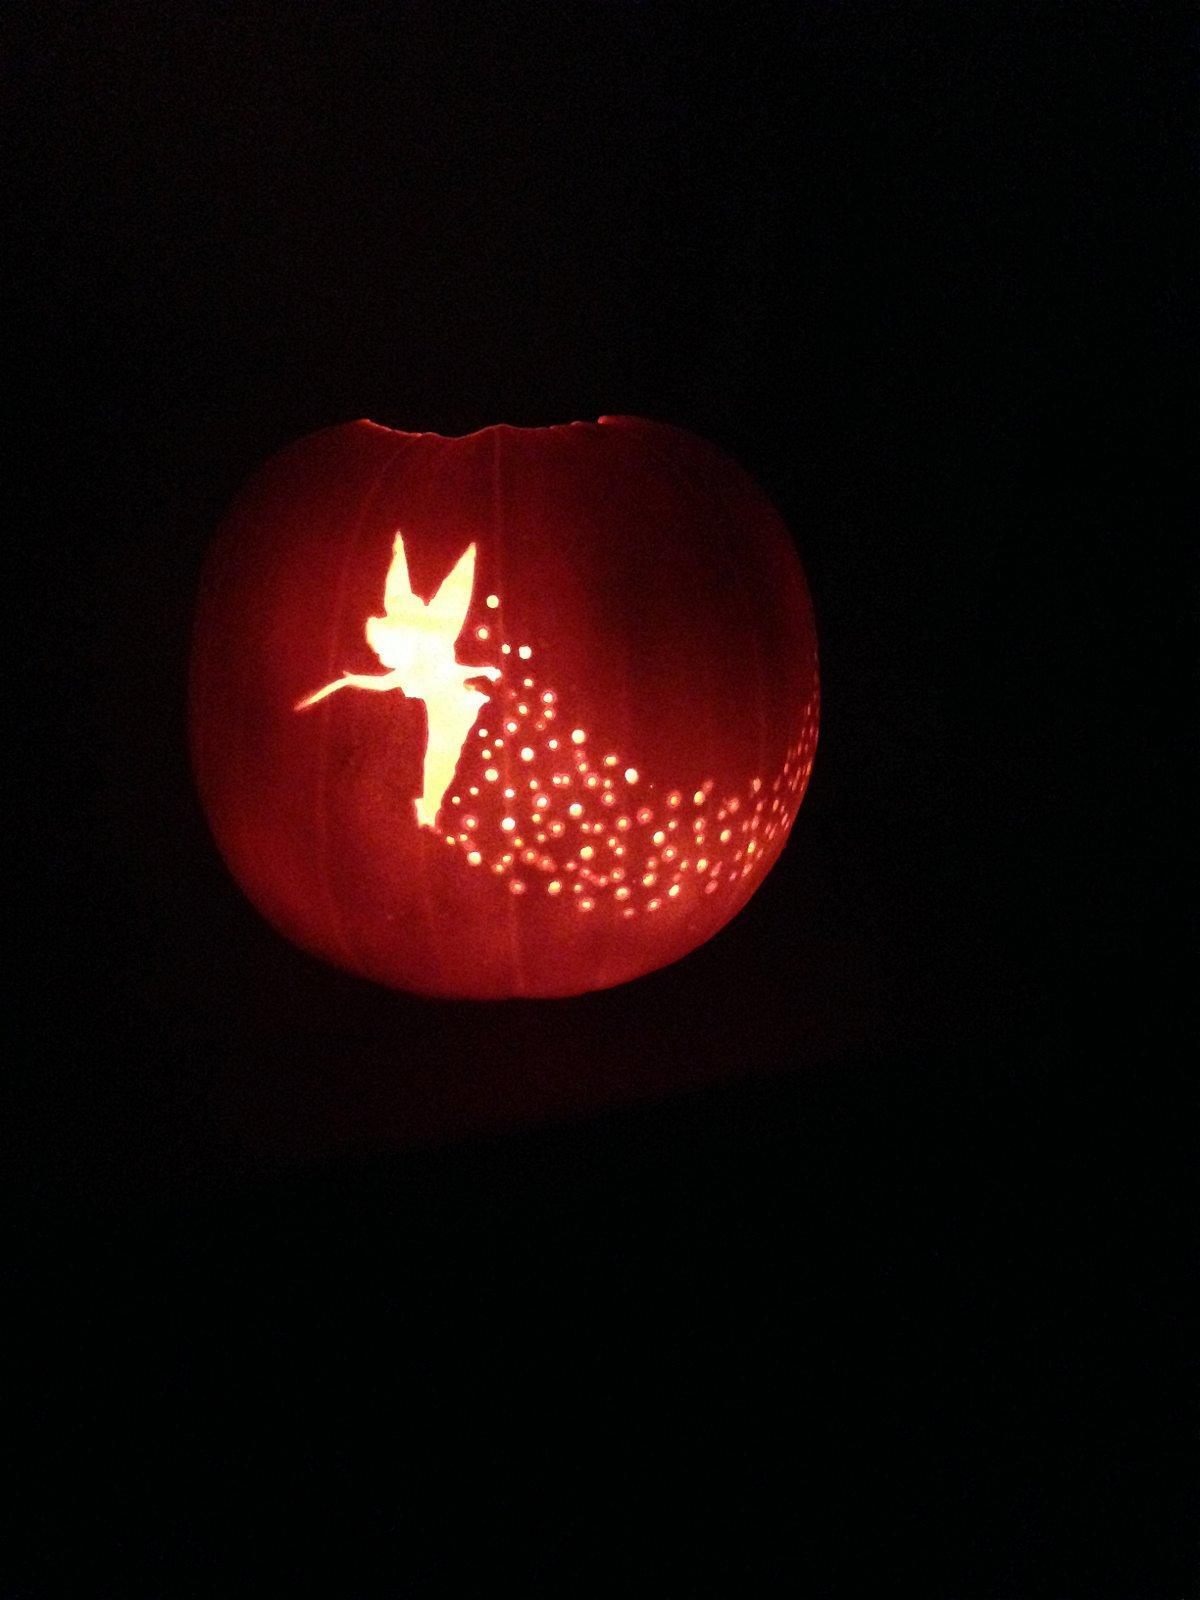 Fairy pumpkin carving by Michael Adkins from Marlow.